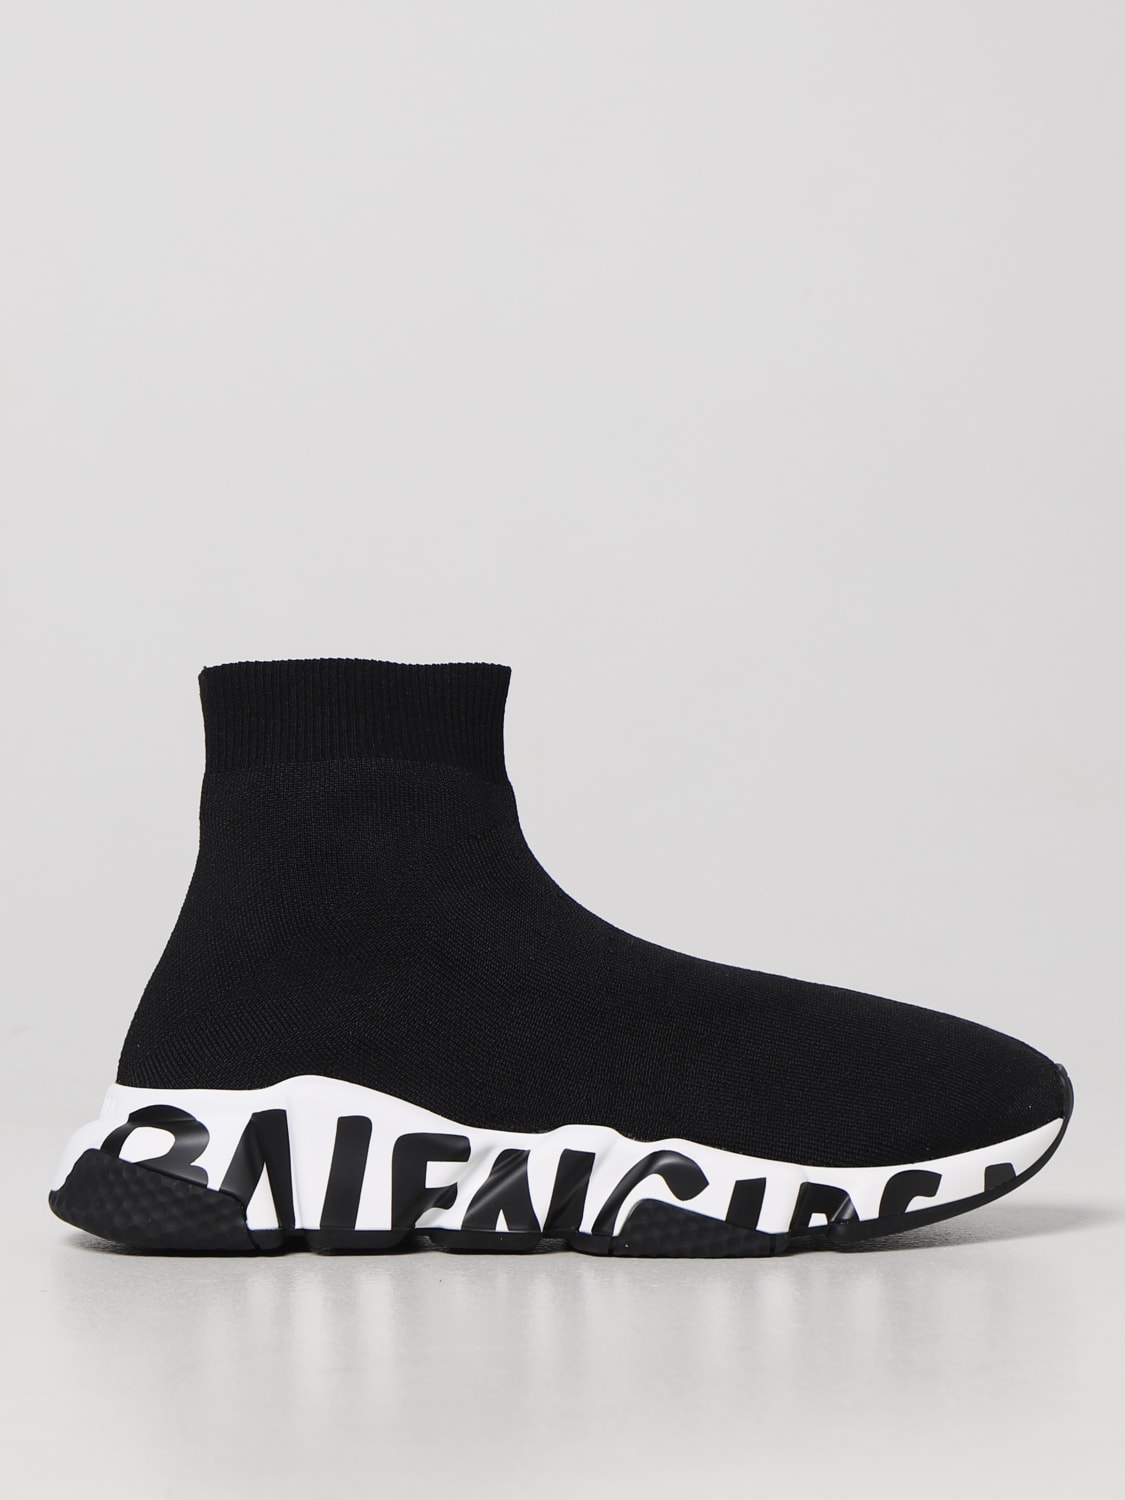 Grine Præferencebehandling opføre sig BALENCIAGA: Speed Recycled knit sneakers - Black | Balenciaga sneakers  605942W2DB7 online on GIGLIO.COM